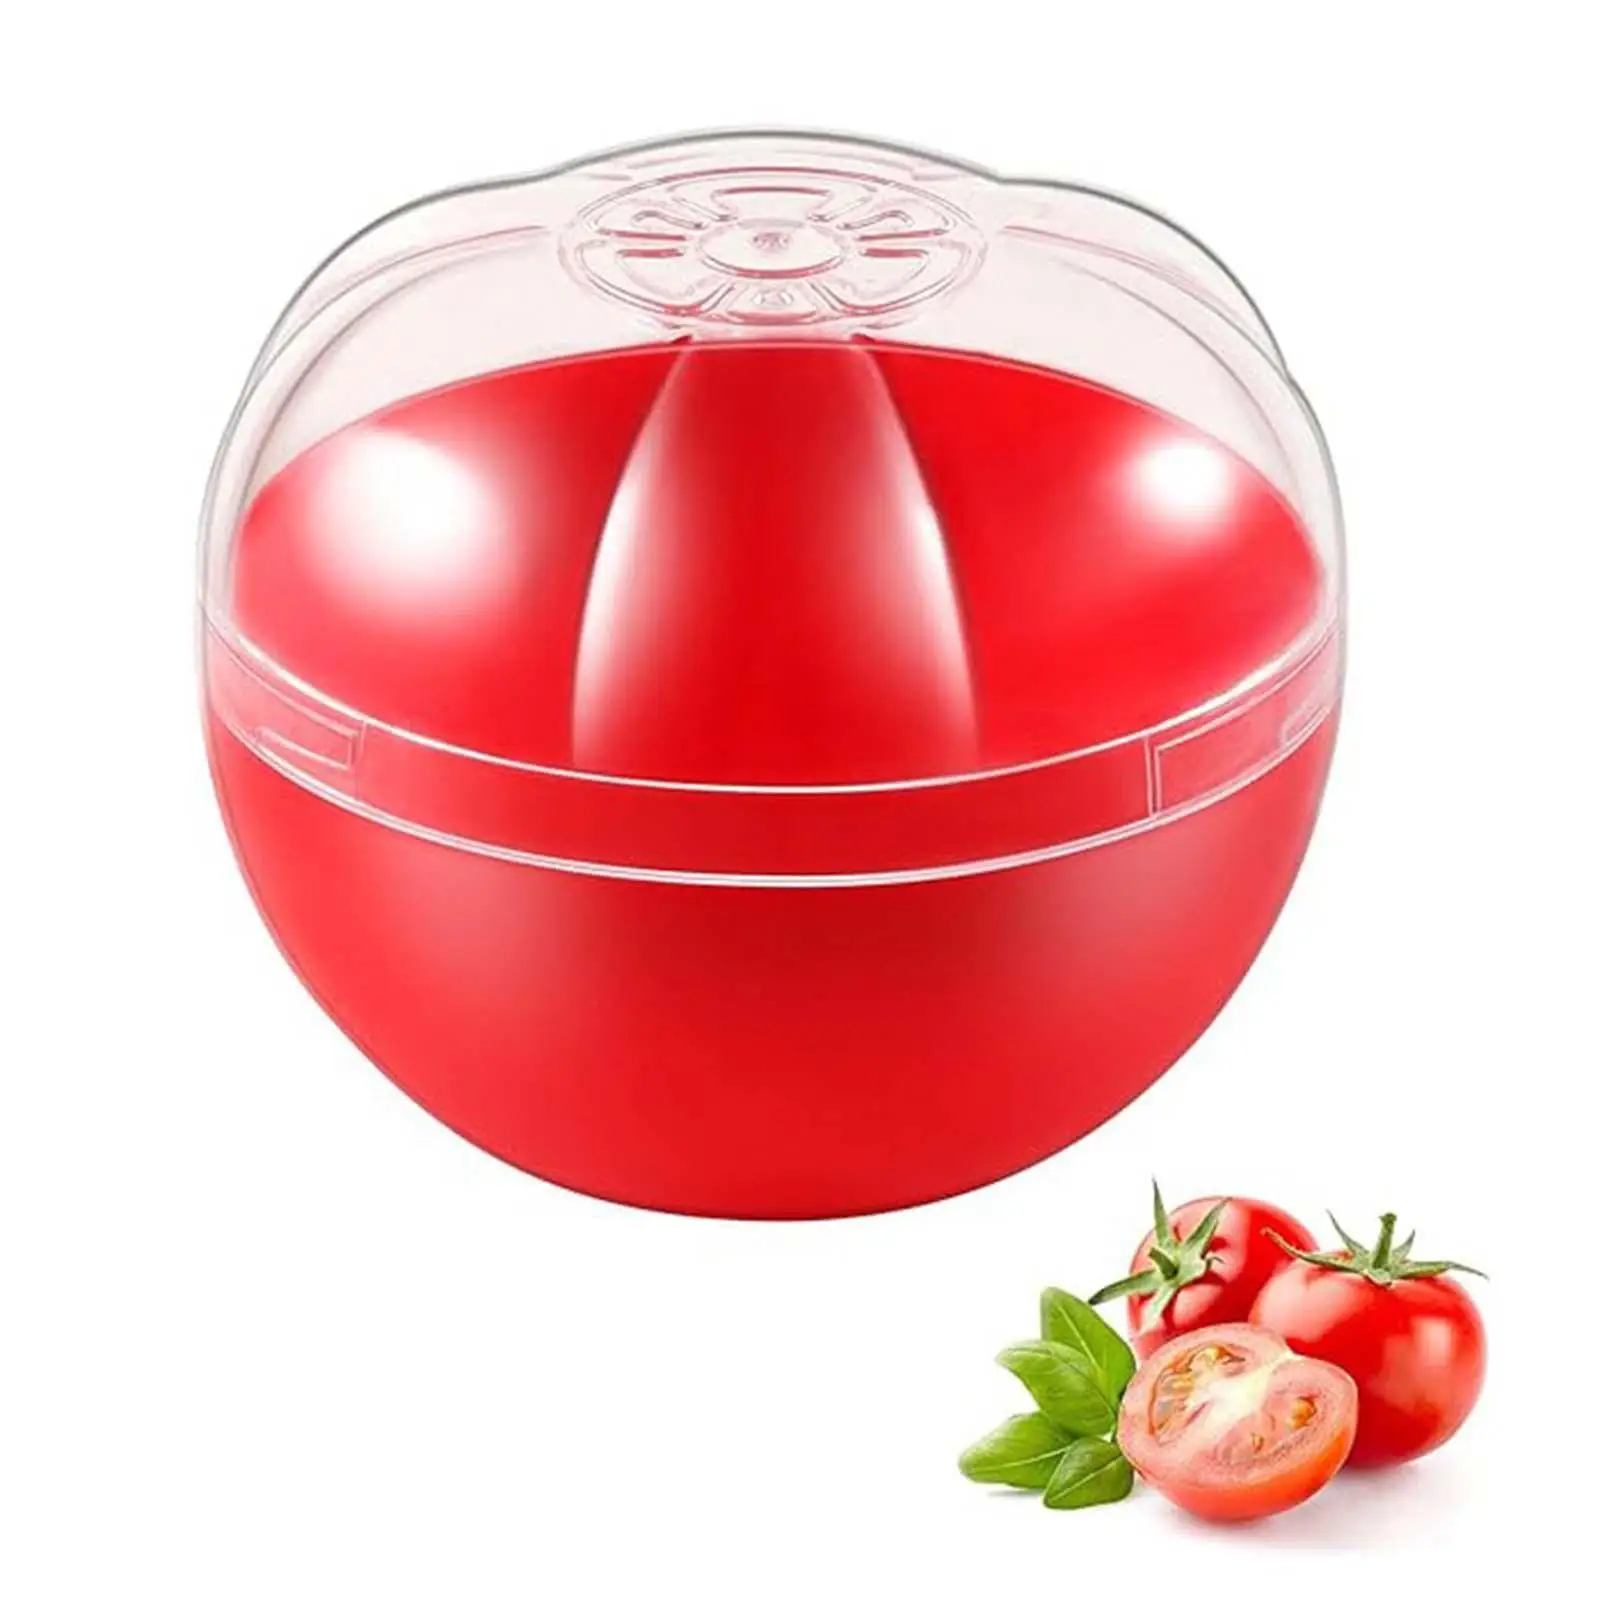 Fruit Vegetable Storage Containers Multifunction Practical Food Storage Case for Onion Lemon Green Pepper Tomato Kitchen